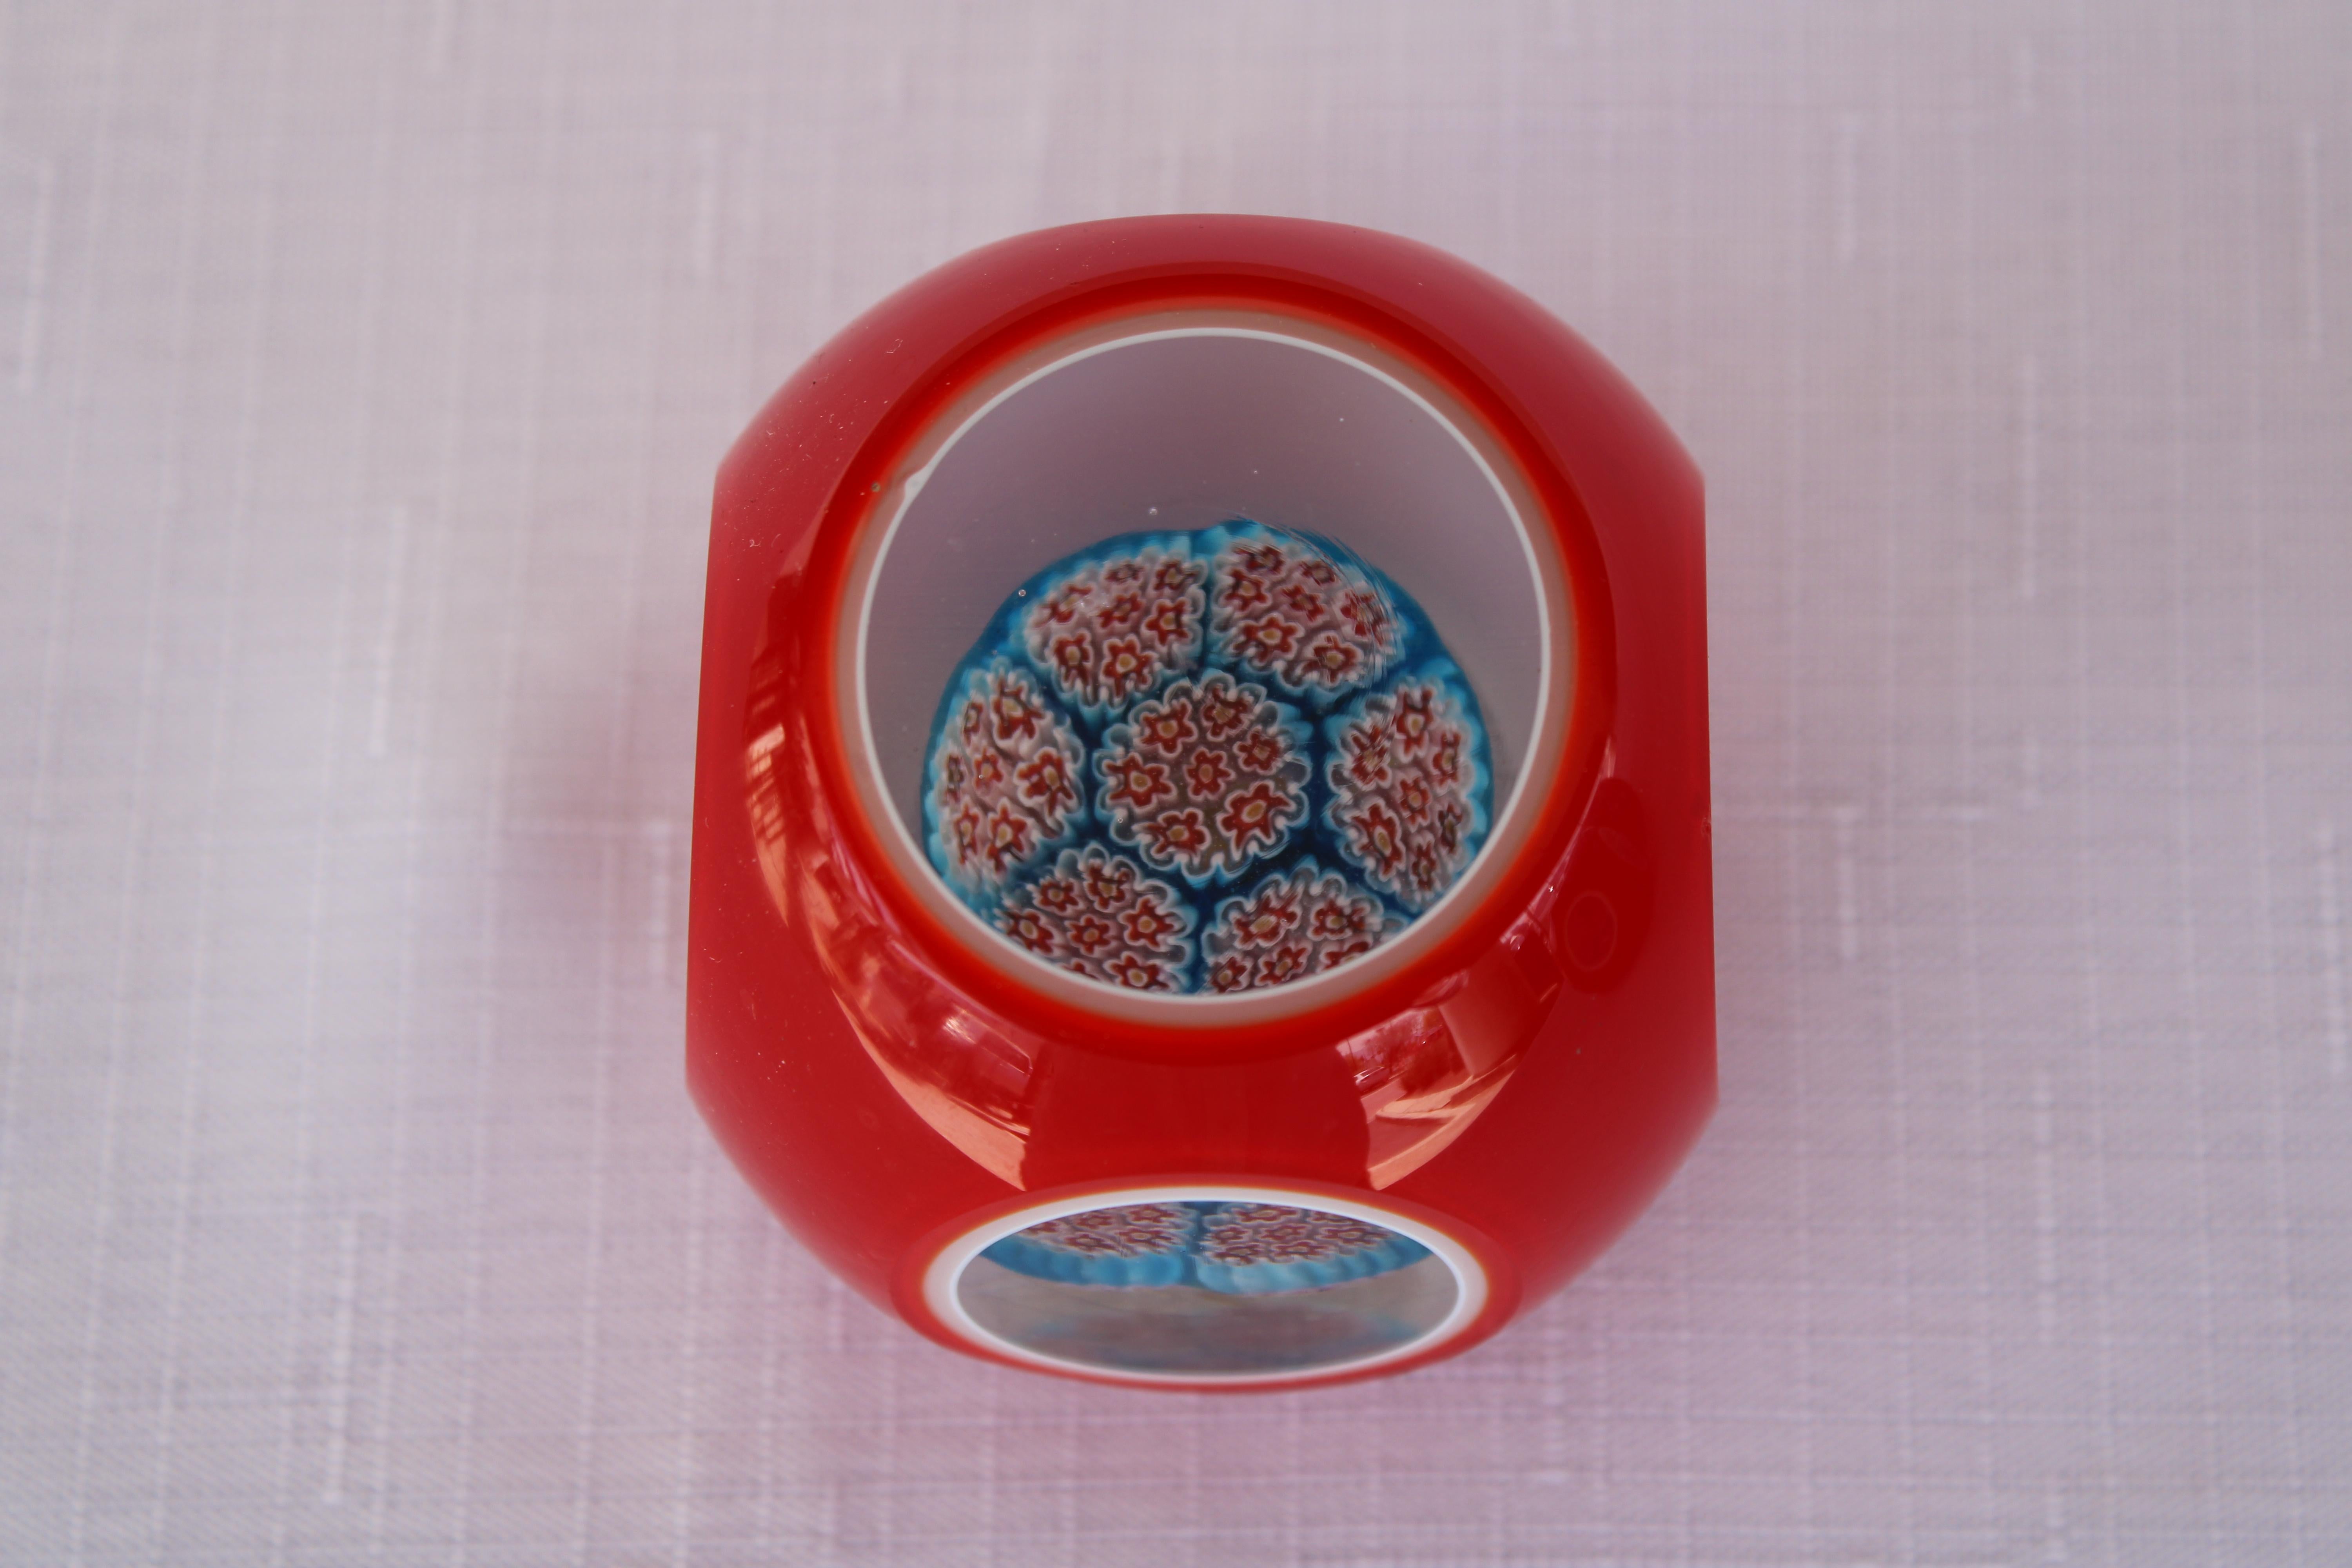 Four Italian Murano red millefiori cased glass paperweights. From left to right they measure 1.) 2.75